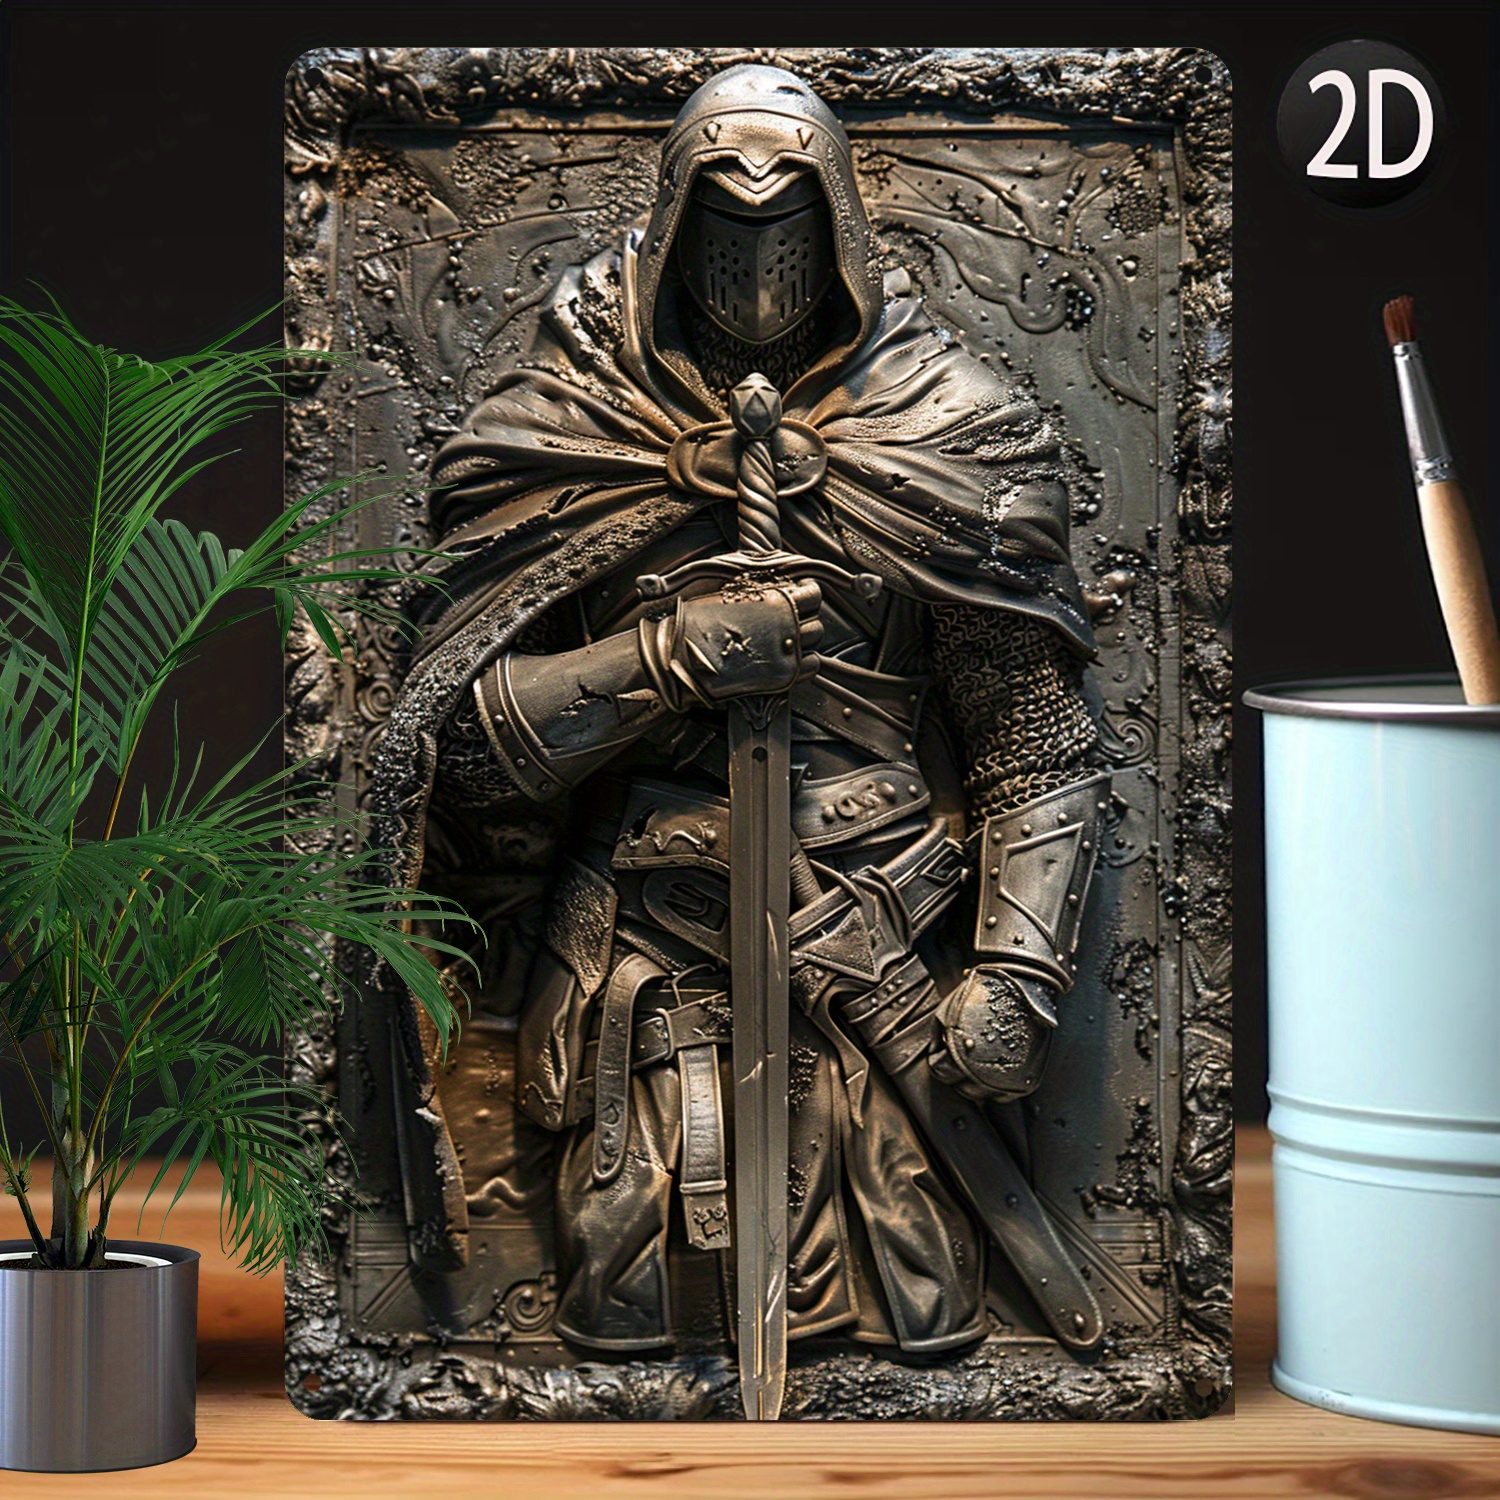 

Aluminum Metal 3d Relief Assassin Warrior Wall Art, 8x12 Inch Moisture-resistant Decorative Tin Sign For Home And Garden, Durable Vintage Gift For All Seasons